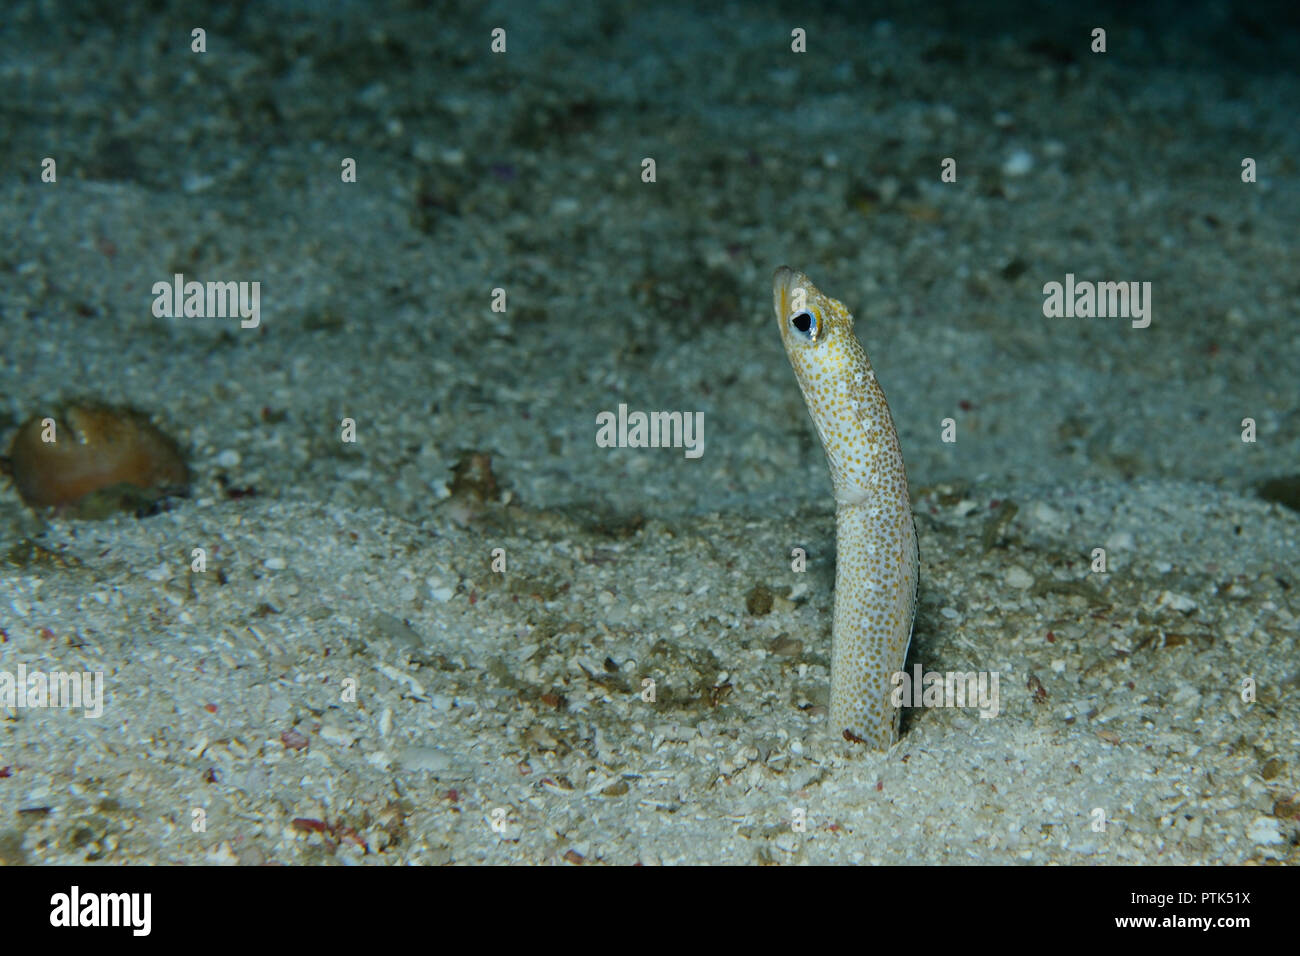 Garden eel is peeping out its burrow ready to hide, Panglao, Philippines Stock Photo